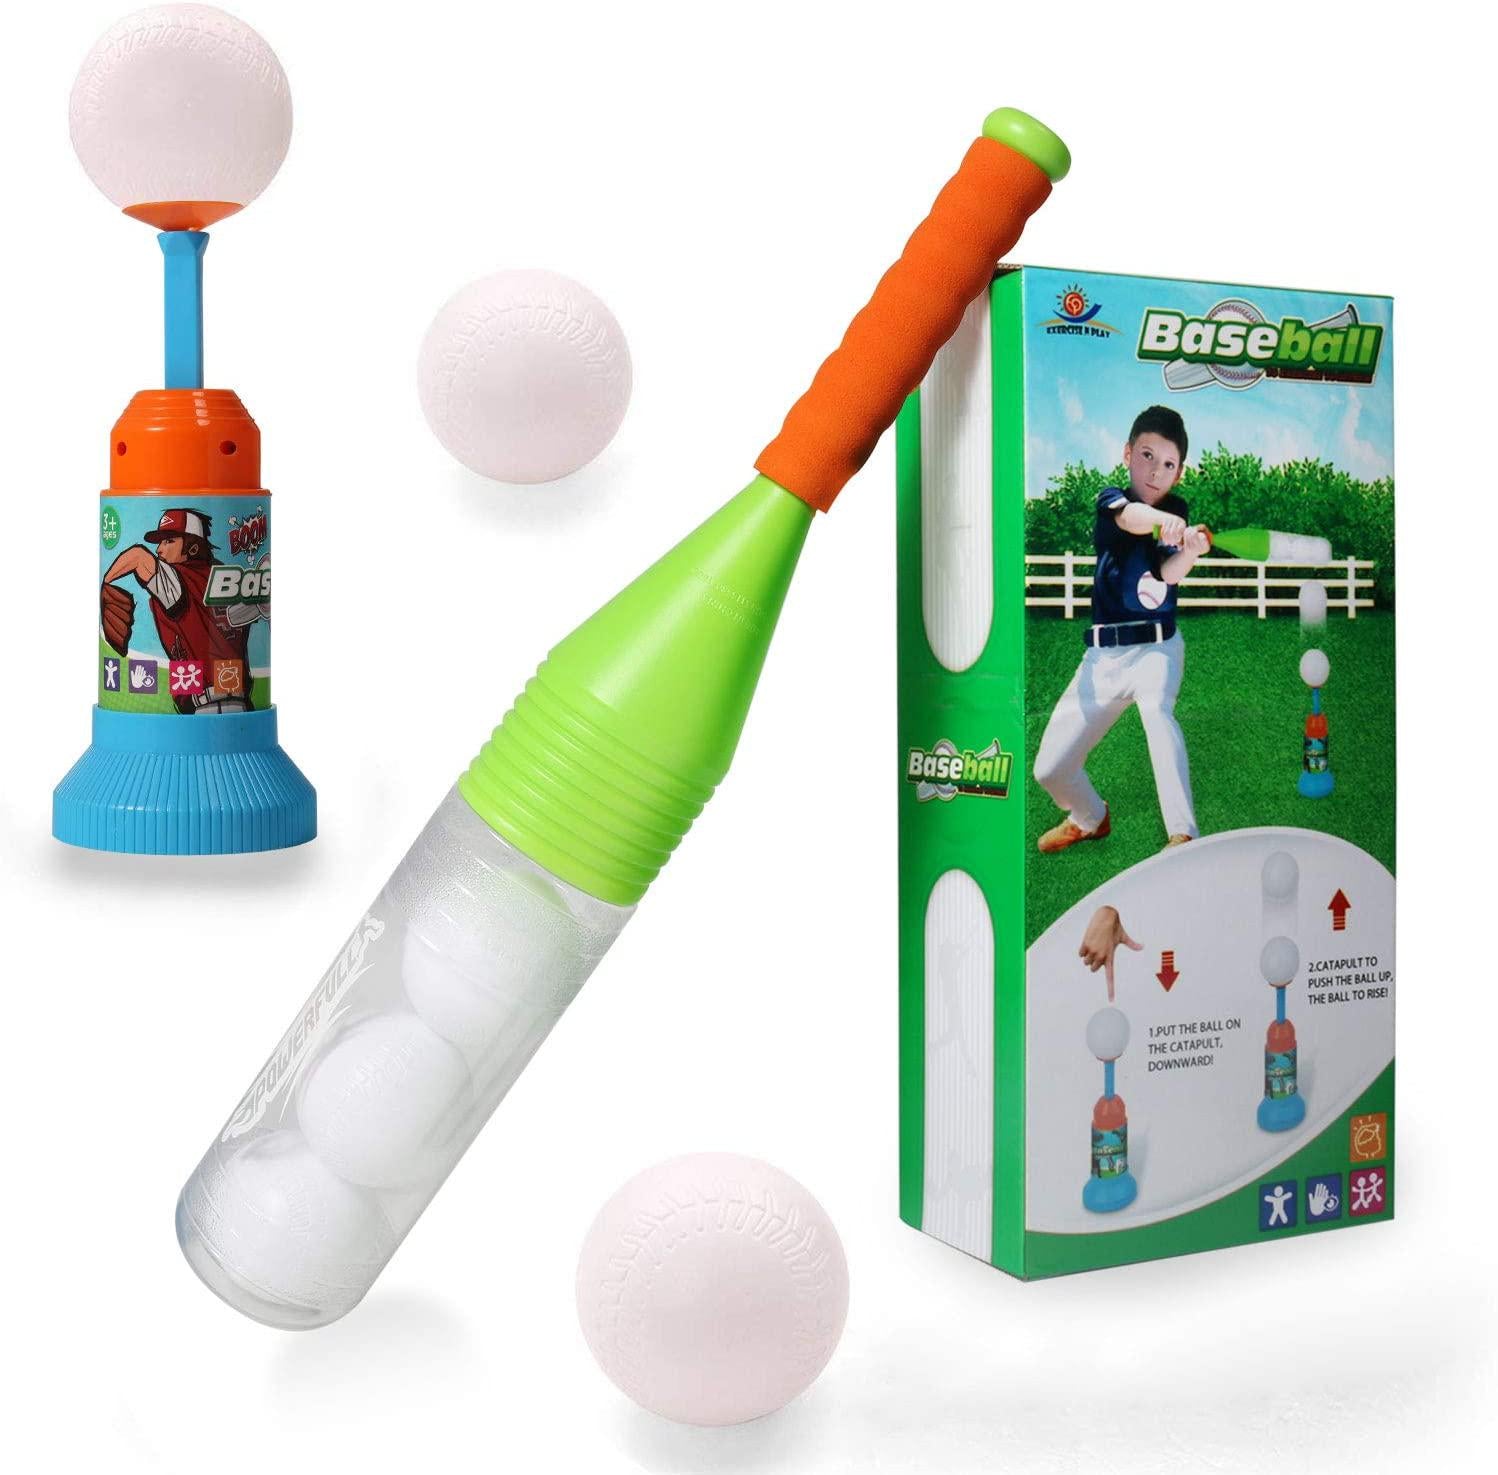 EXERCISE N PLAY, EXERCISE N PLAY Training Automatic Launcher Baseball Bat Toys - Indoor Outdoor Sports Baseball Games T-Ball Set for Children